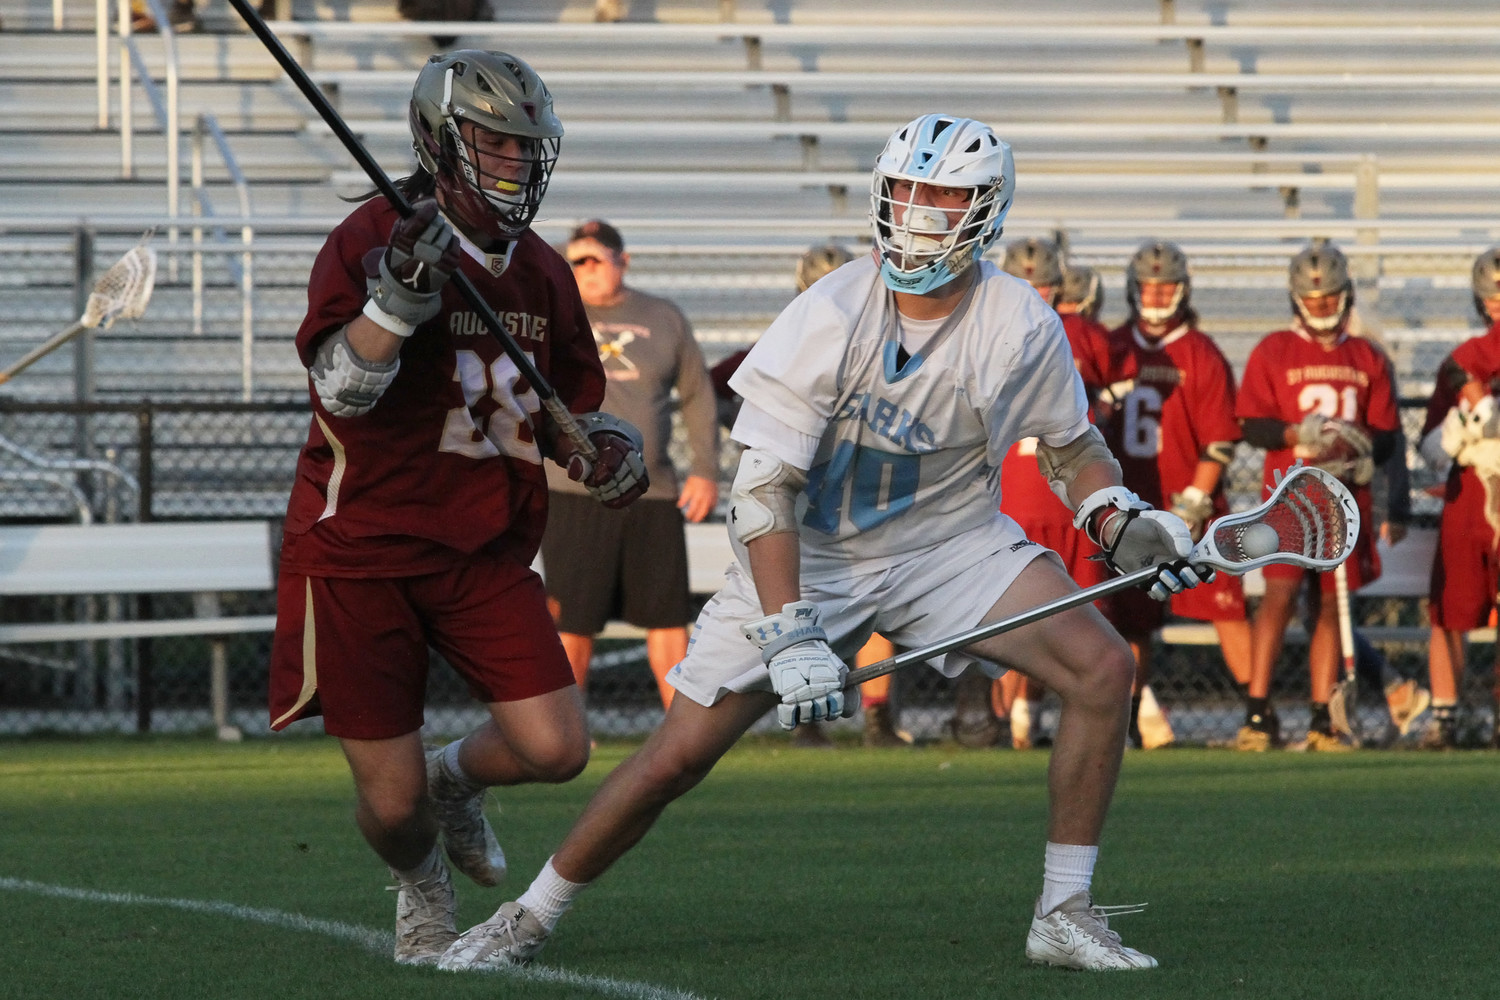 Dylan Hess of the Sharks lines up a shot against St. Augustine.